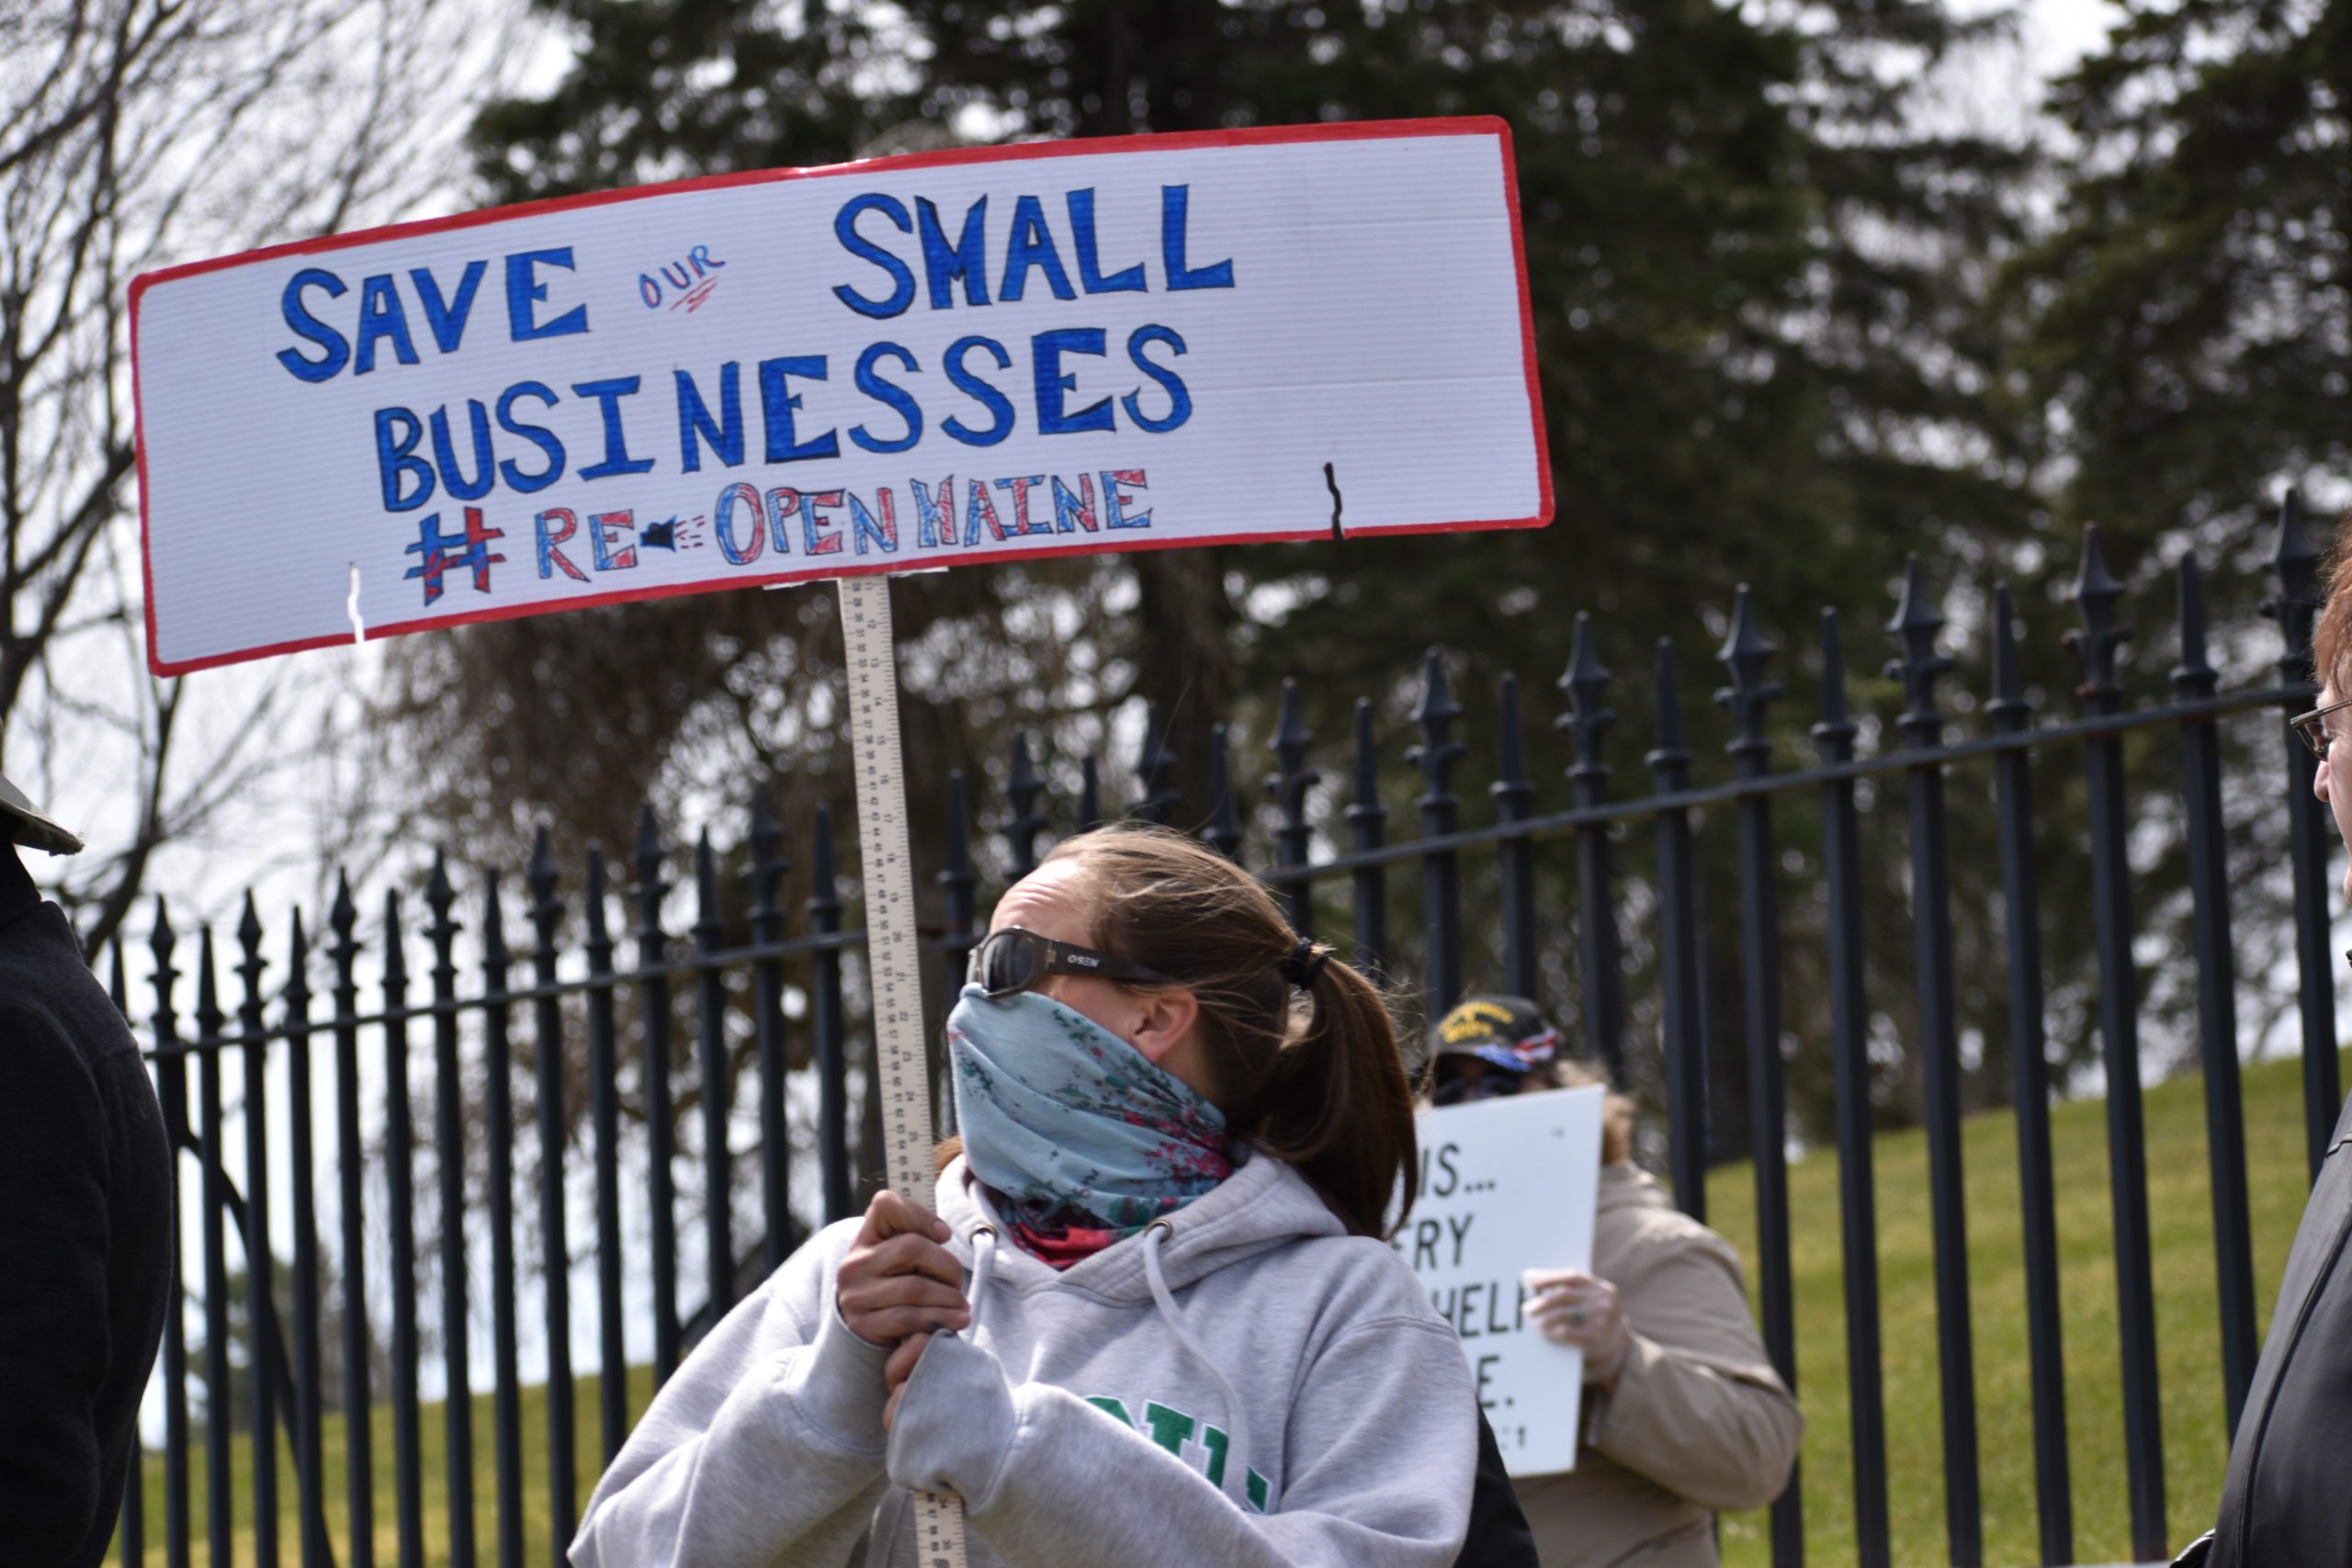 A protestor holds a sign that says save our small businesses re-open Maine